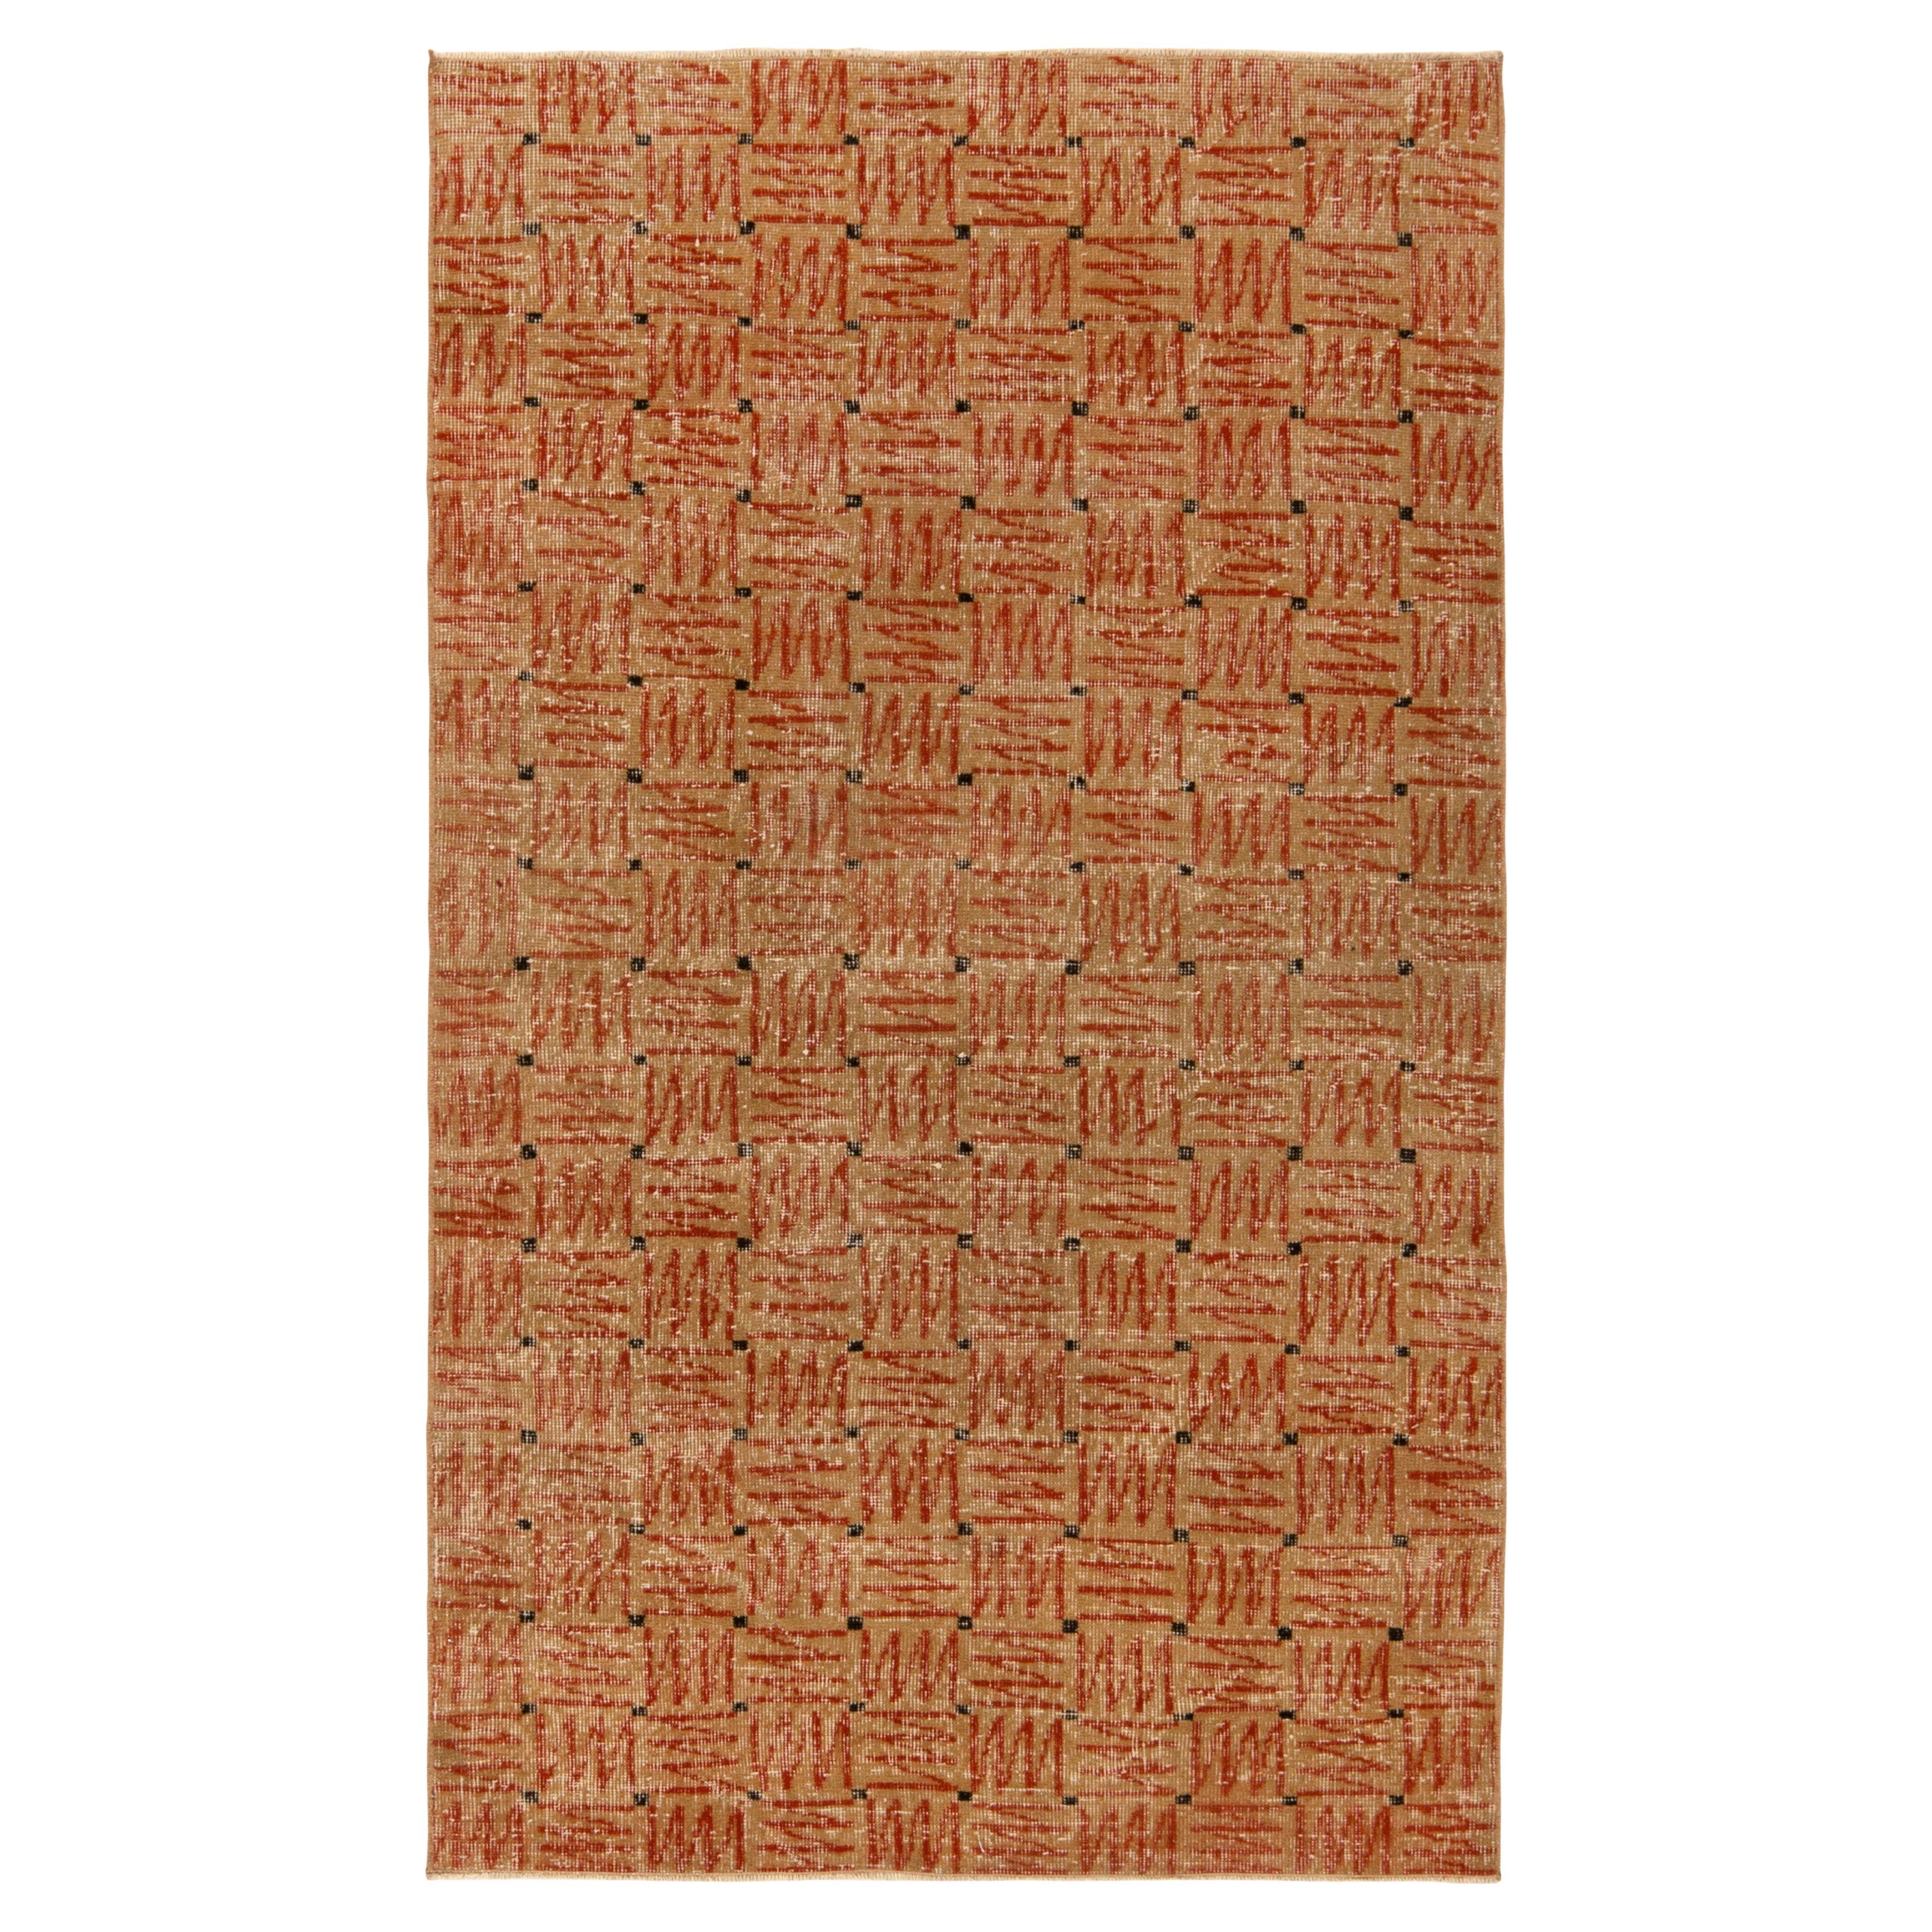 1960s Vintage Deco Rug in Beige-Brown and Red Geometric Patterns, by Rug & Kilim For Sale